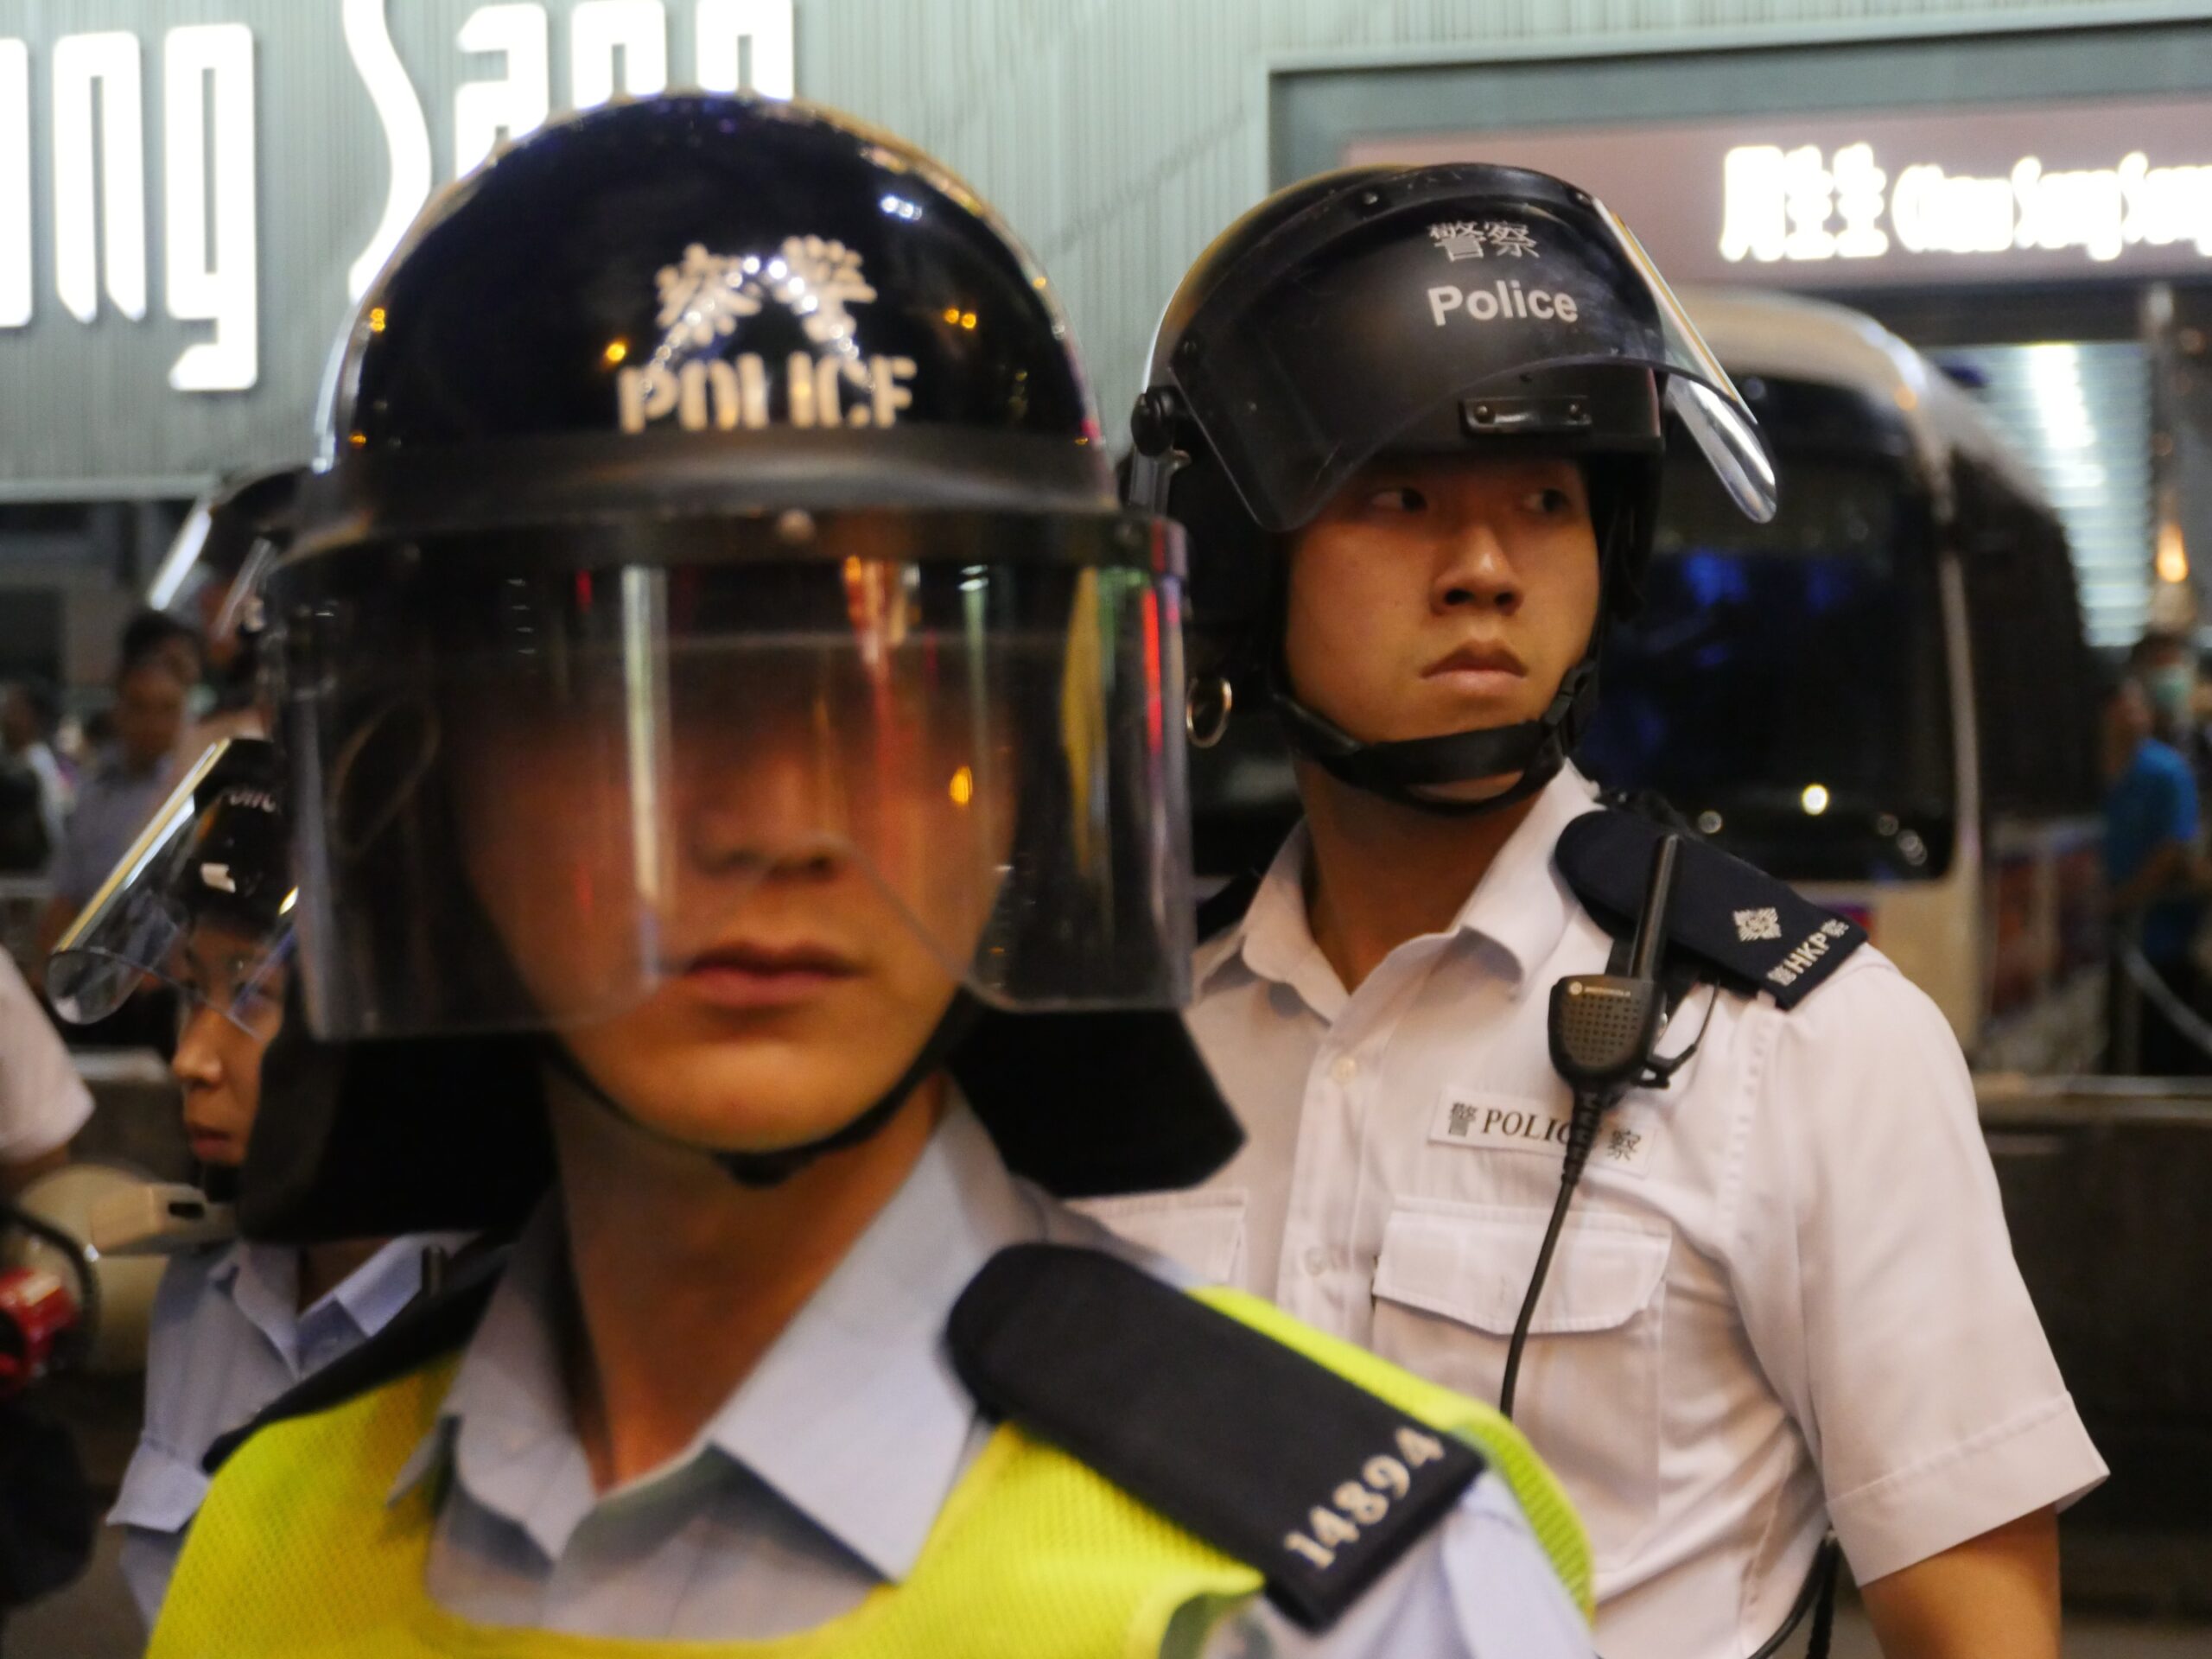 Hong Kong police don helmets and get ready to charge protesters in an attempt to clear the streets.